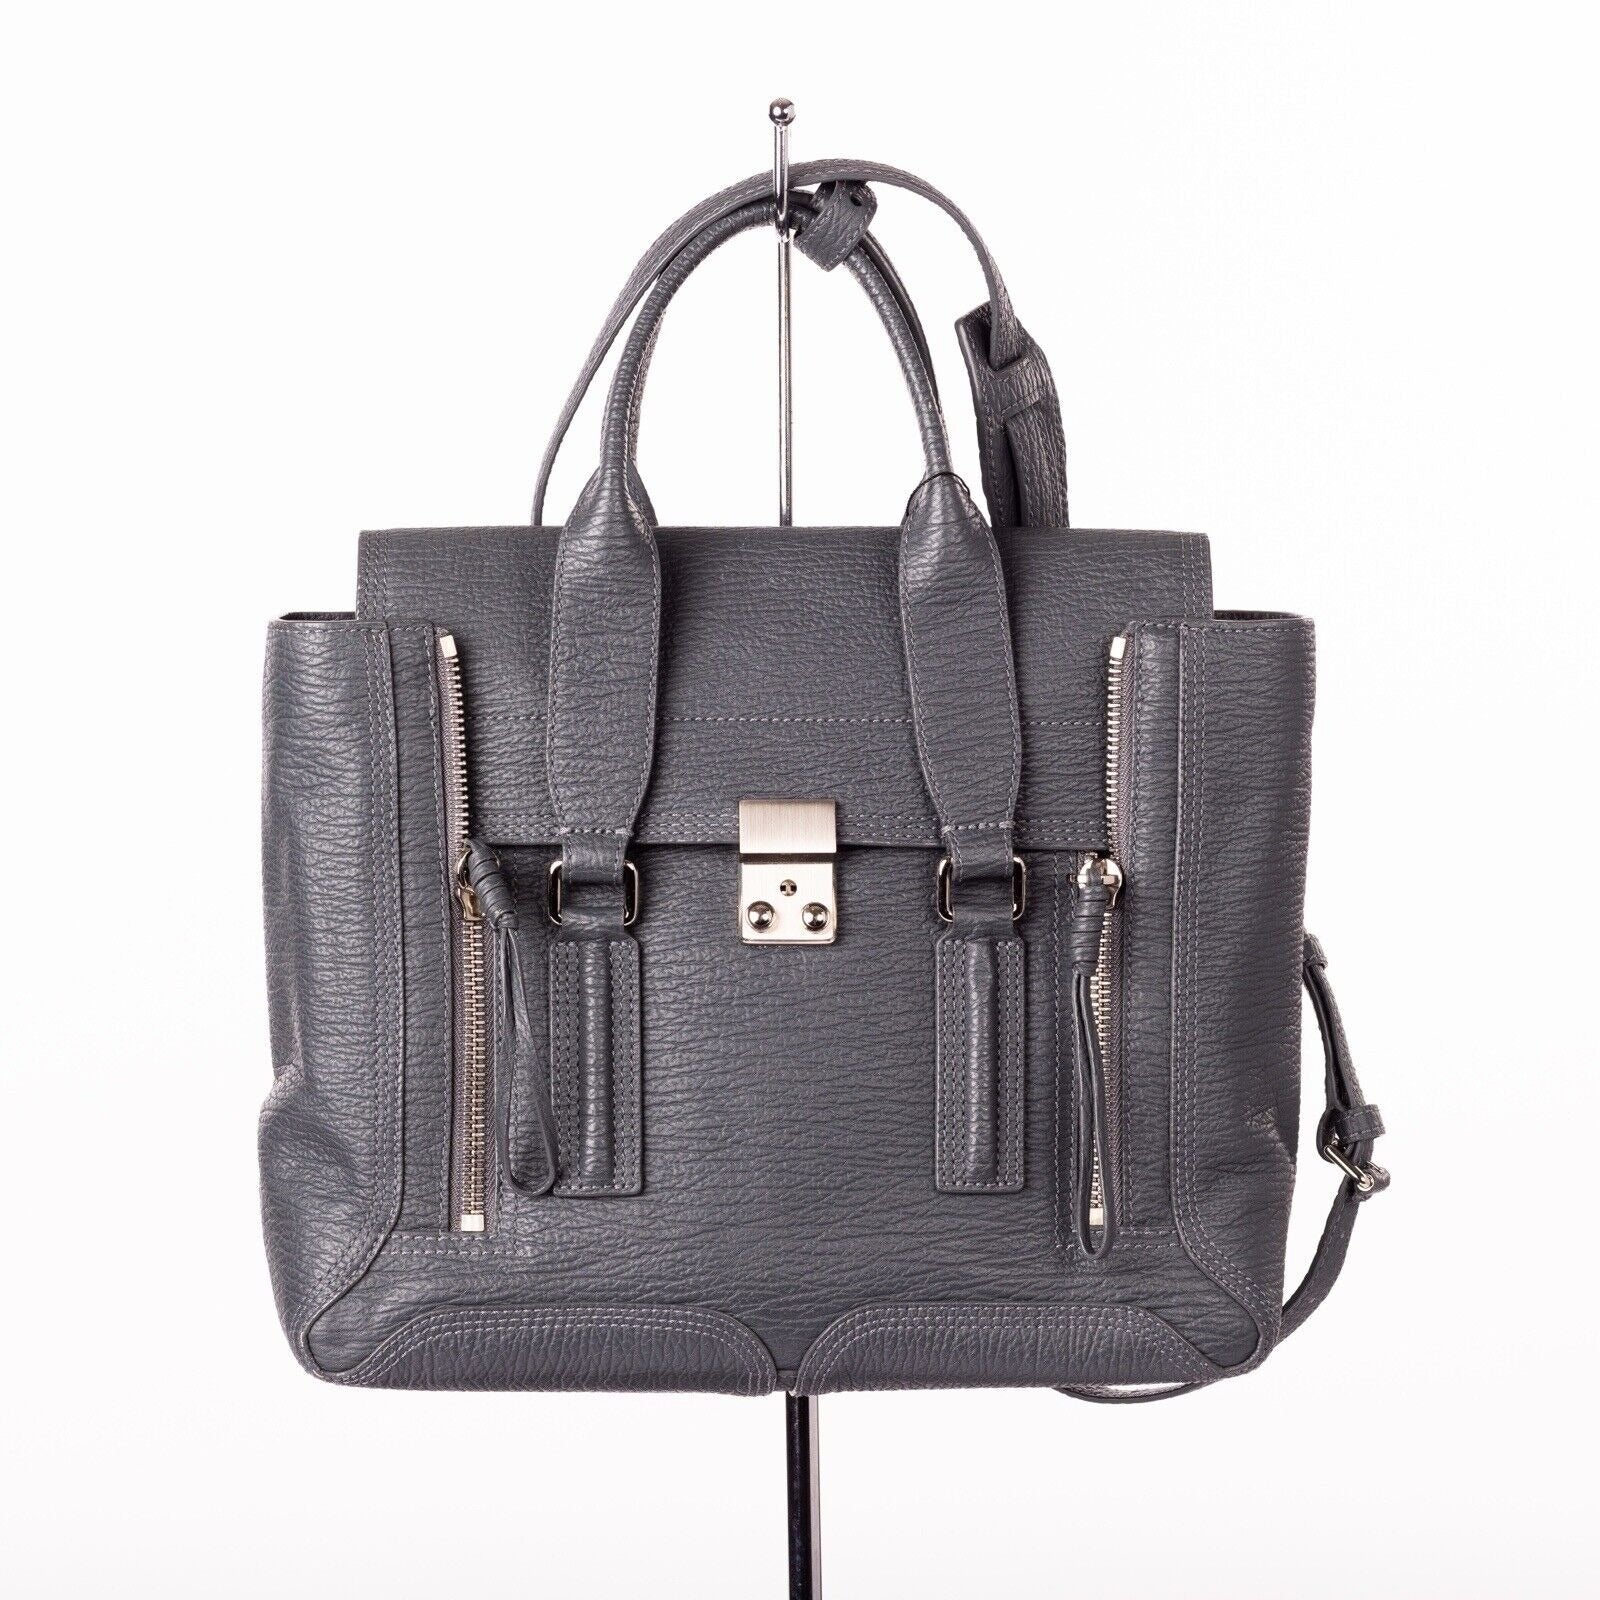 3.1 Phillip Lim Leather Pashli Medium Handbag Satchel In Gray Displayed on a Stand and White Background